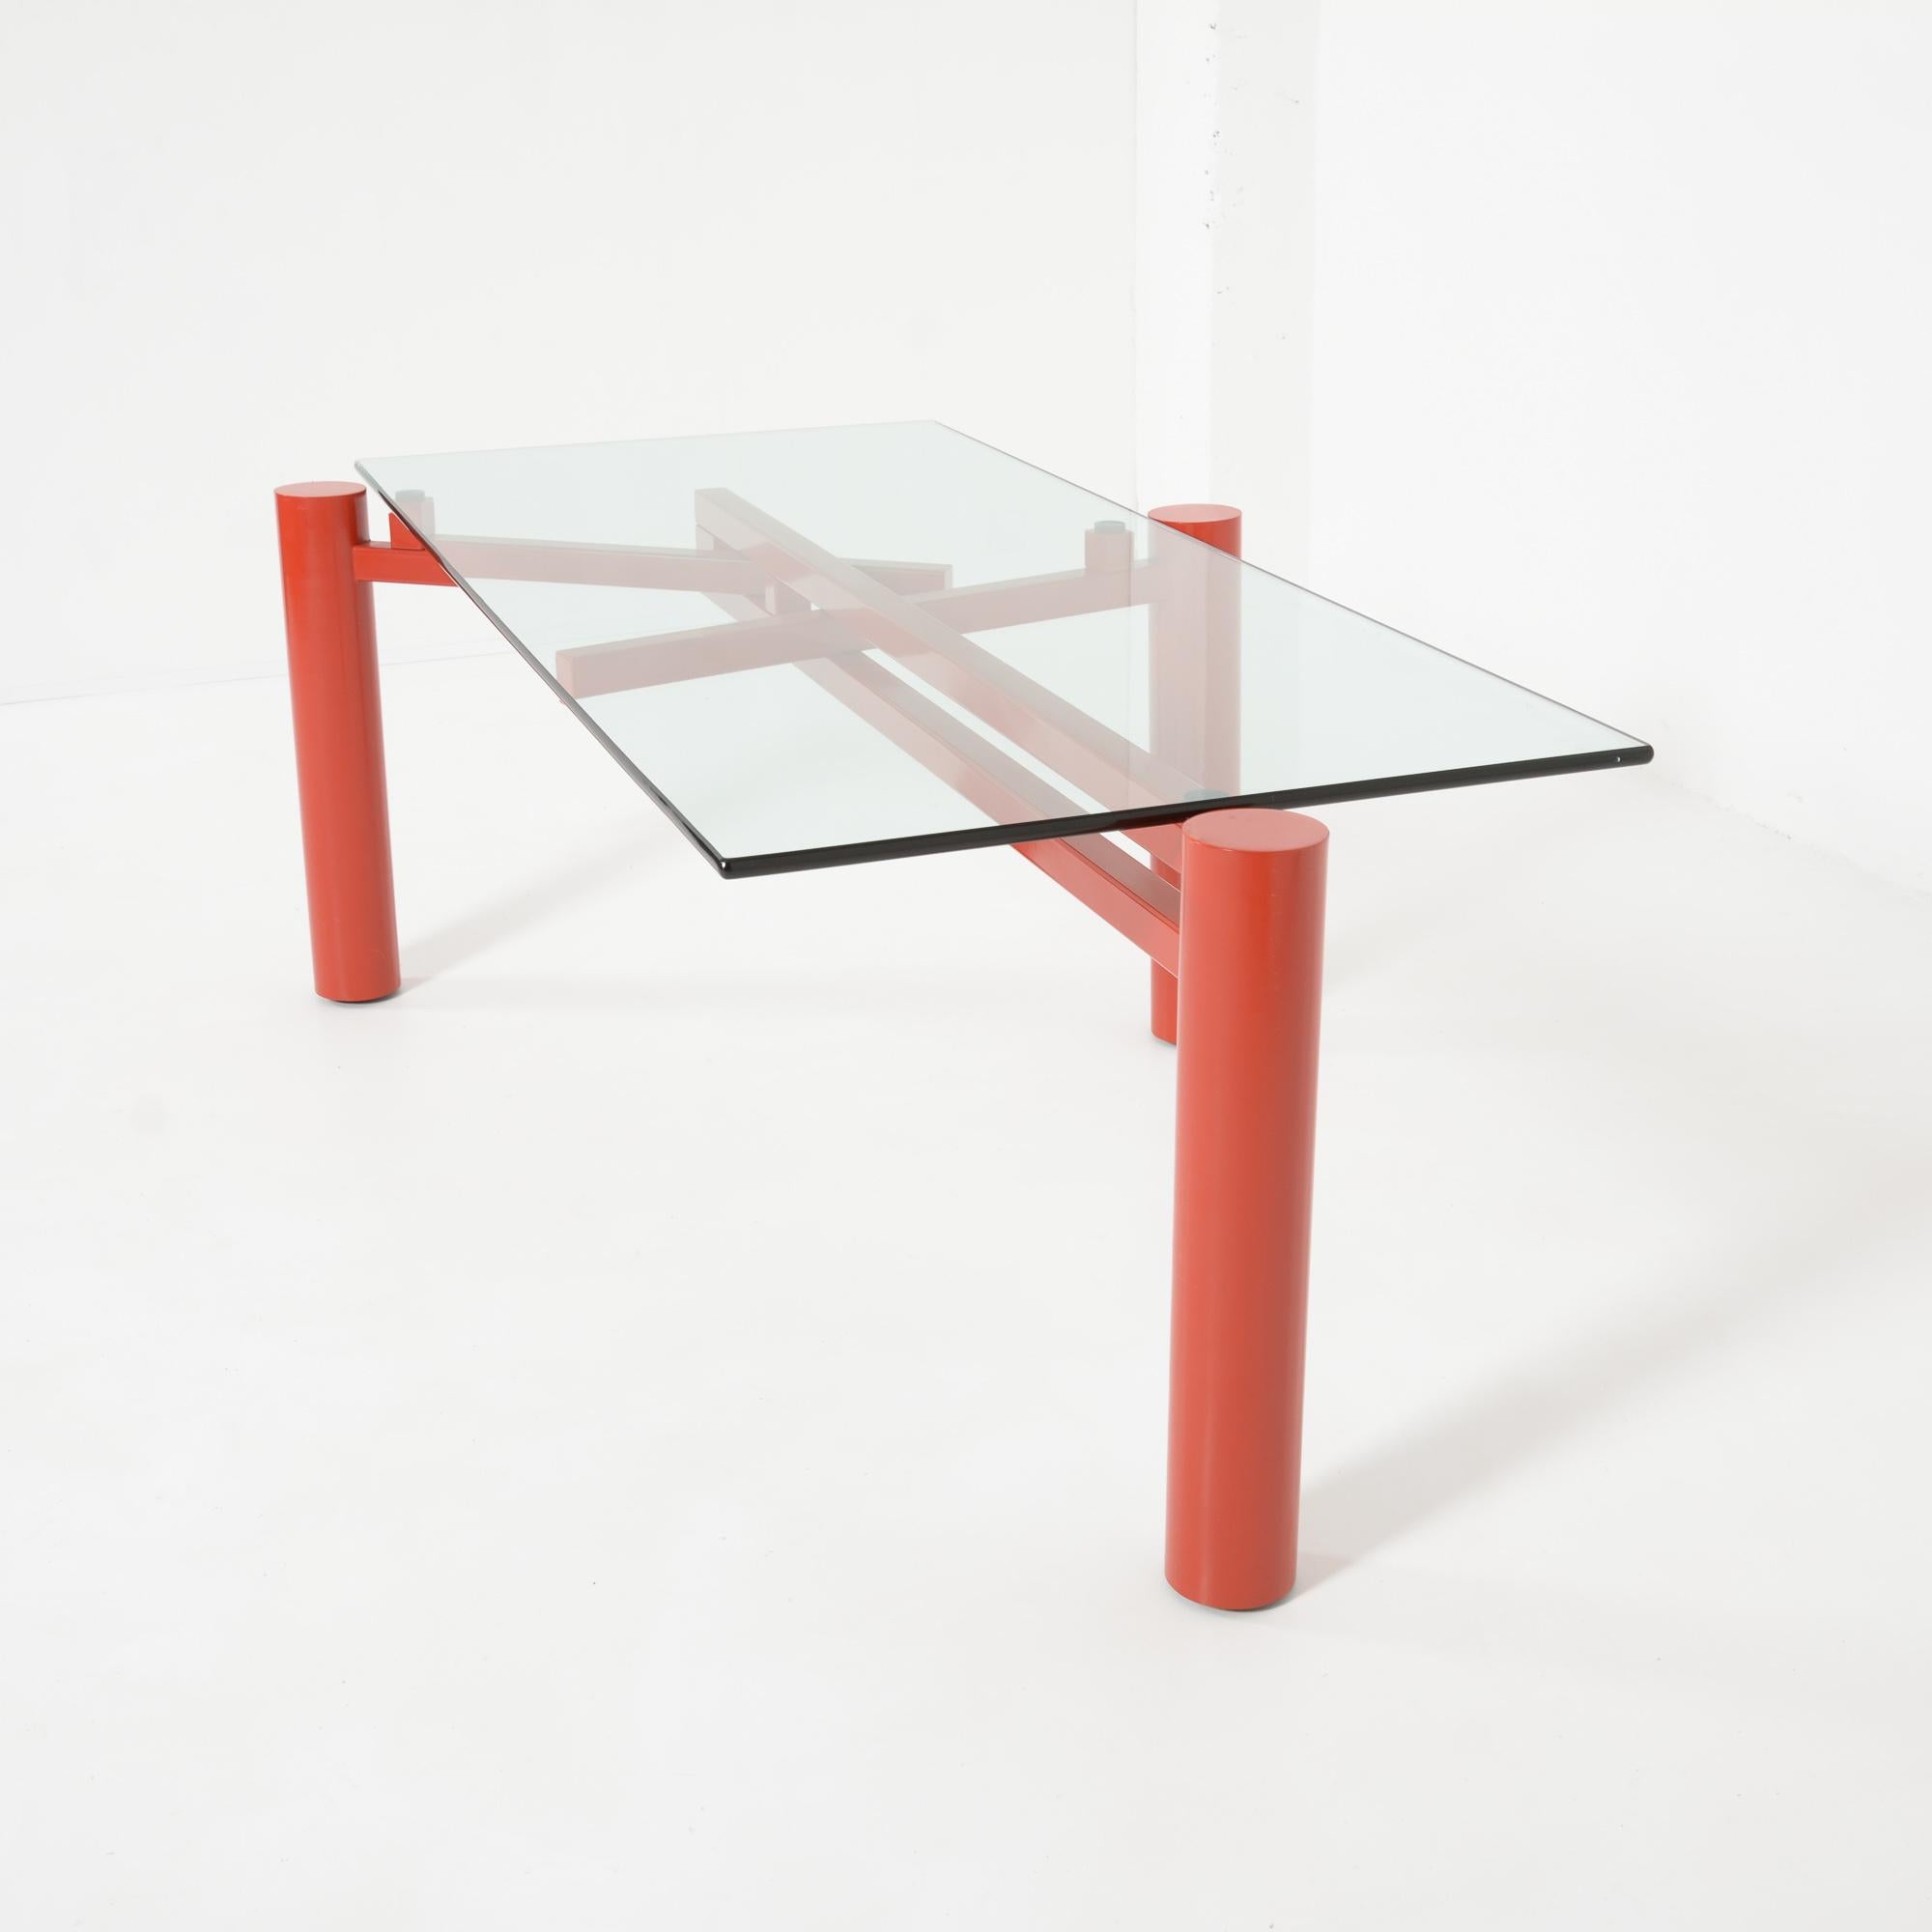 Constructivist Dining Table by Christophe Gevers 3